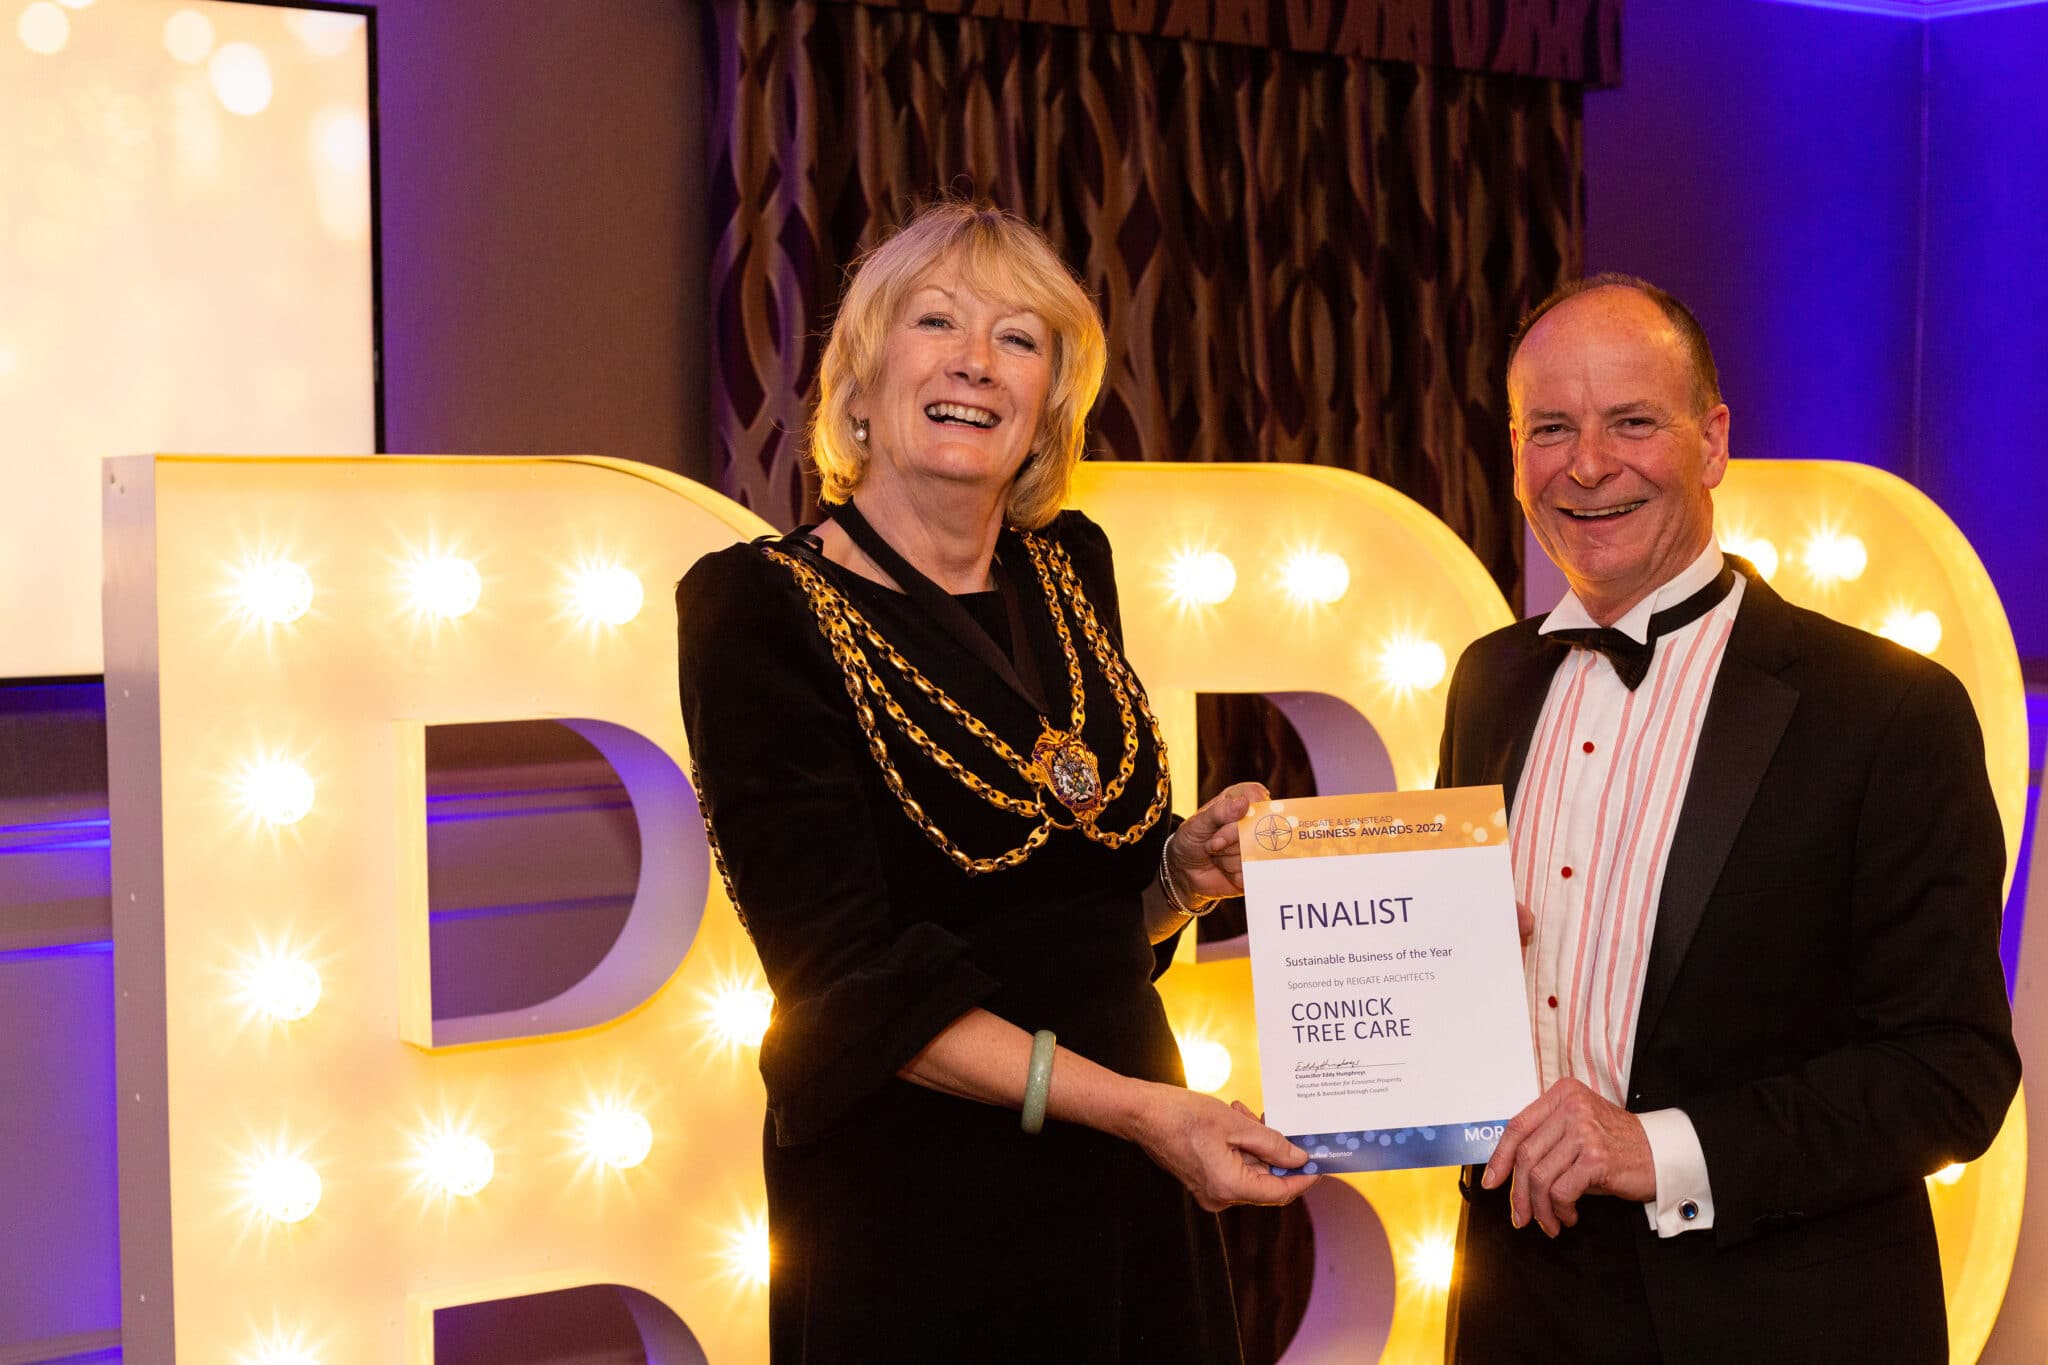 Mike Connick at the Mayor of Reigate at the Reigate & Banstead Business Awards